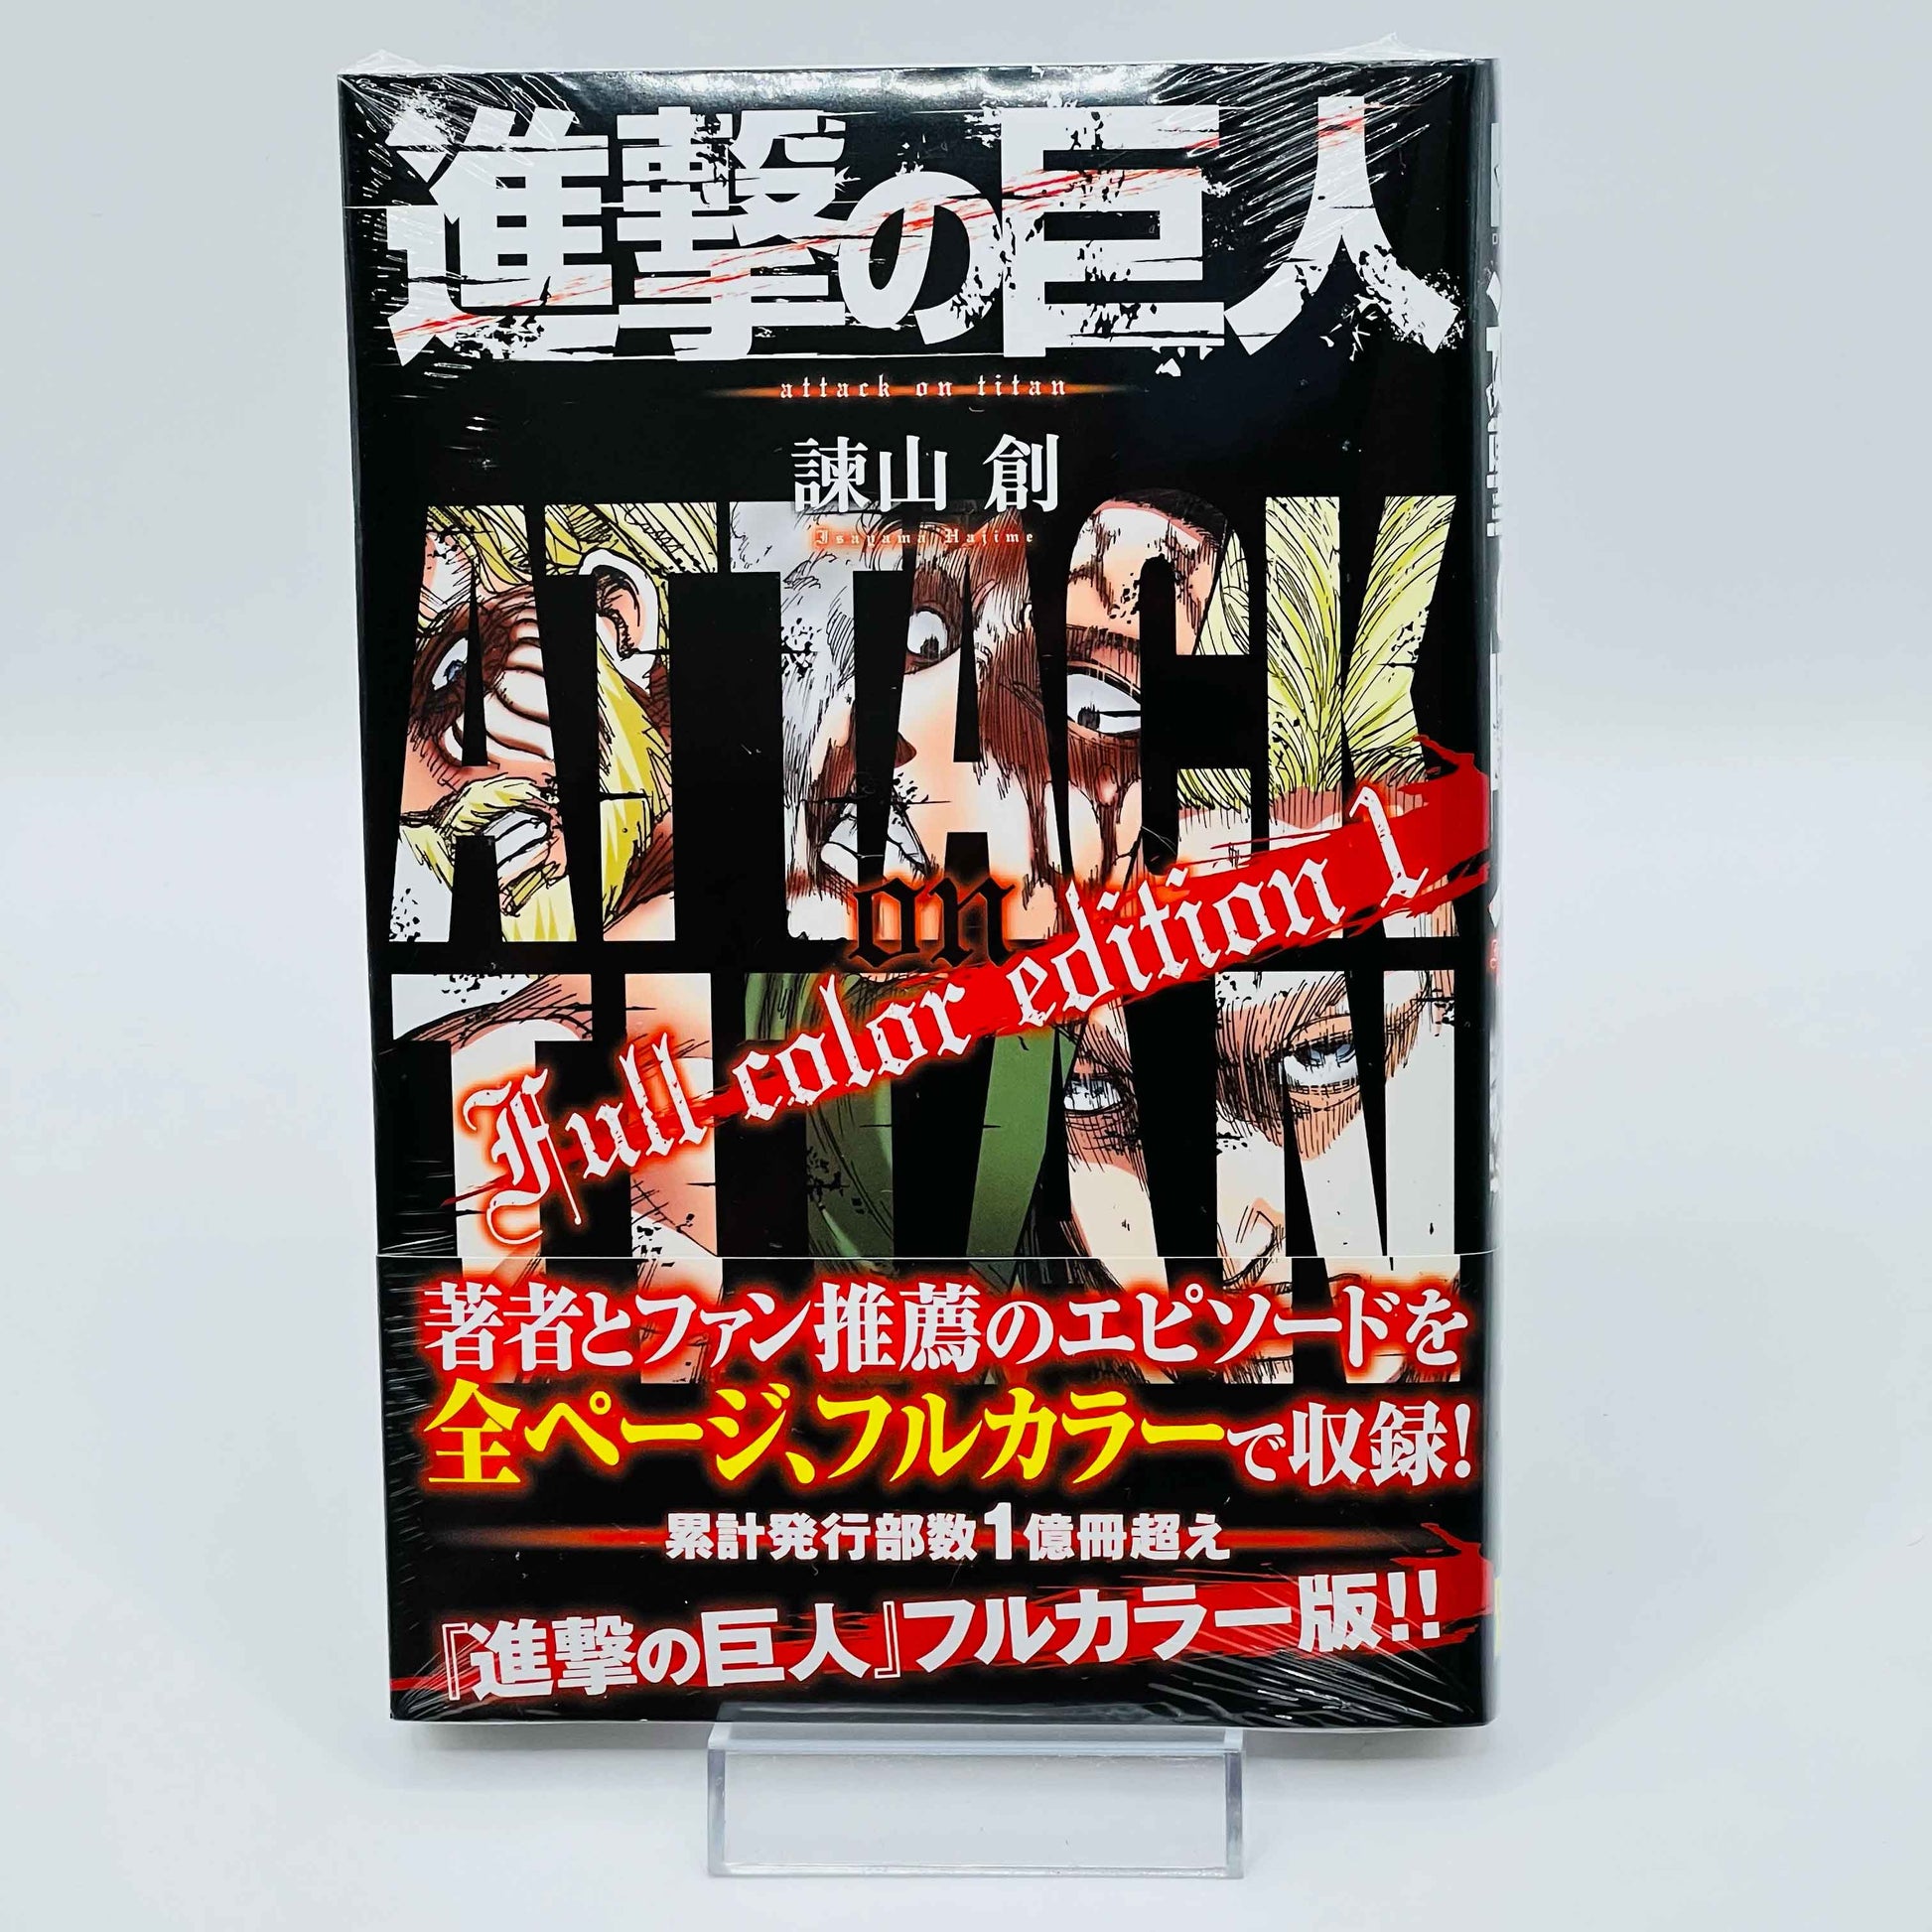 Attack on Titan (Full Color Edition - New Sealed) - Volume 01 - 1stPrint.net - 1st First Print Edition Manga Store - M-AOTCOLOR-01-005